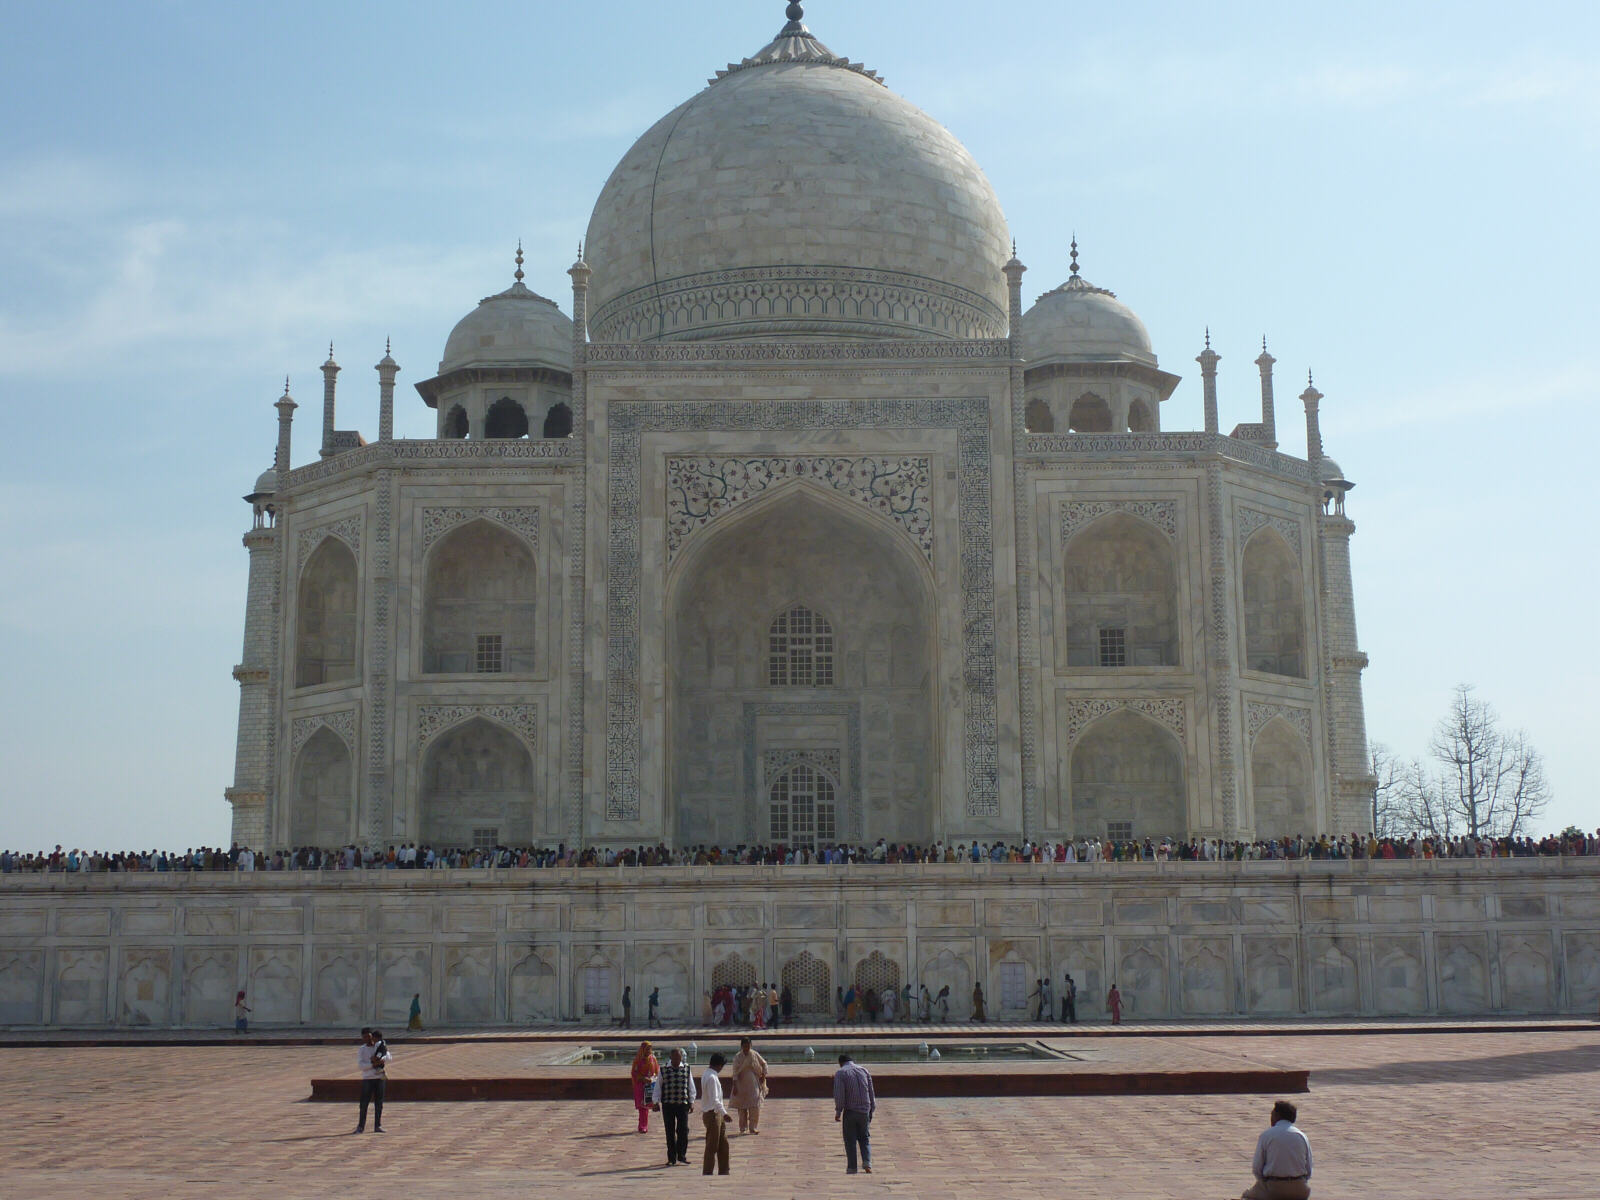 The Taj Mahal and its queue of pilgrims waiting to get in